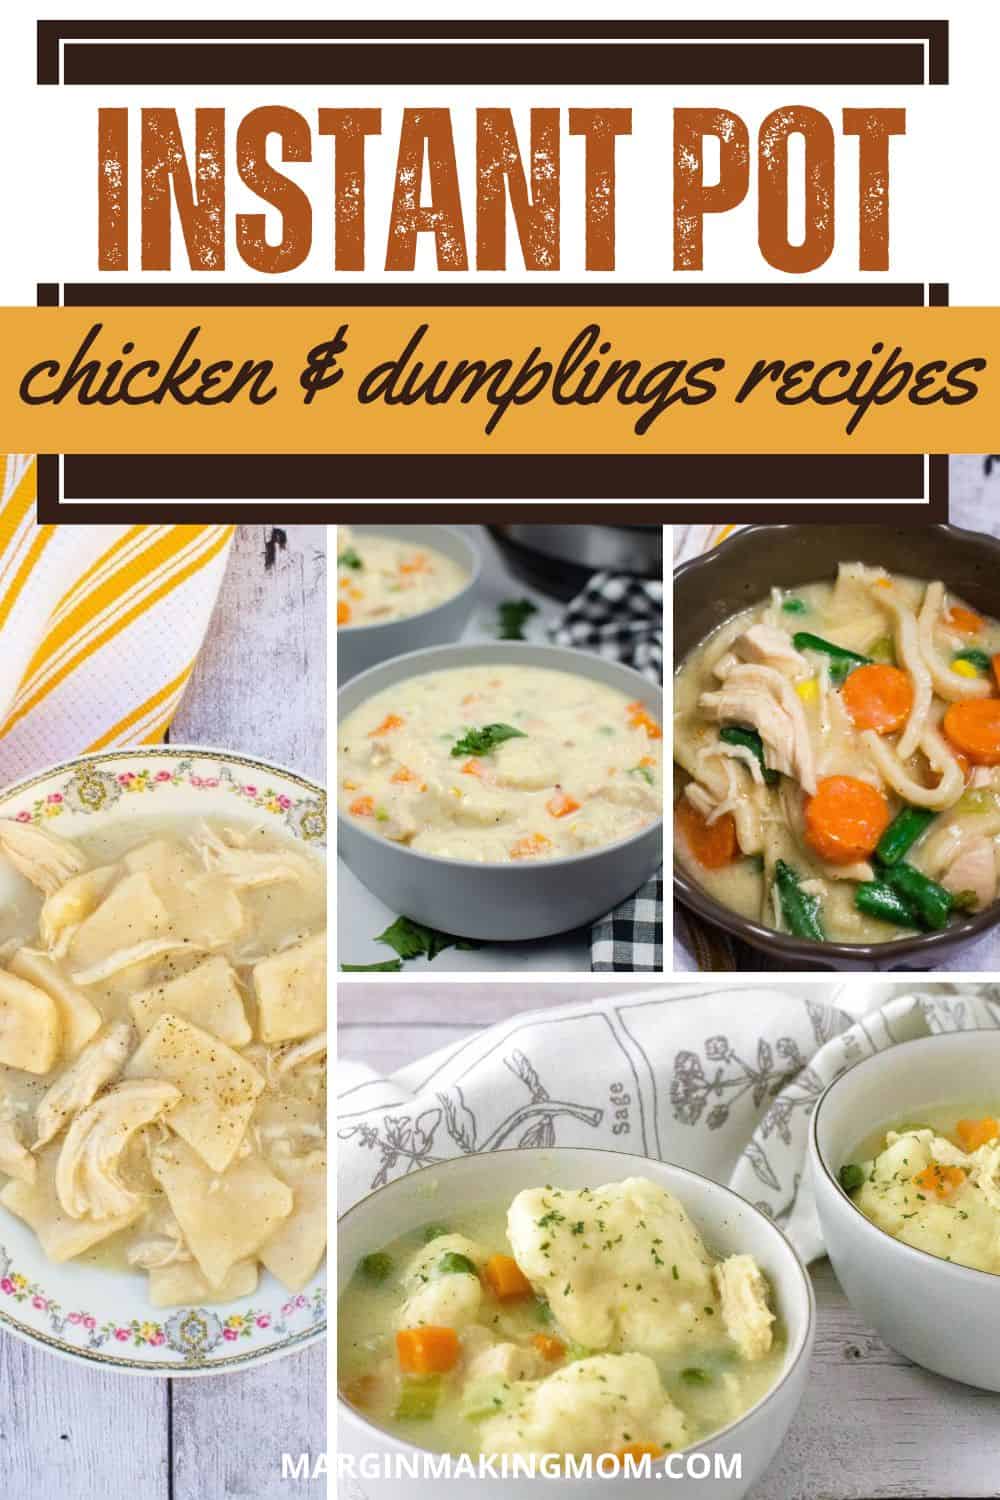 collage image featuring recipes for Instant Pot chicken and dumplings, including those made with flat dumplings, biscuit dumplings, frozen noodles, and bisquick fluffy dumplings.